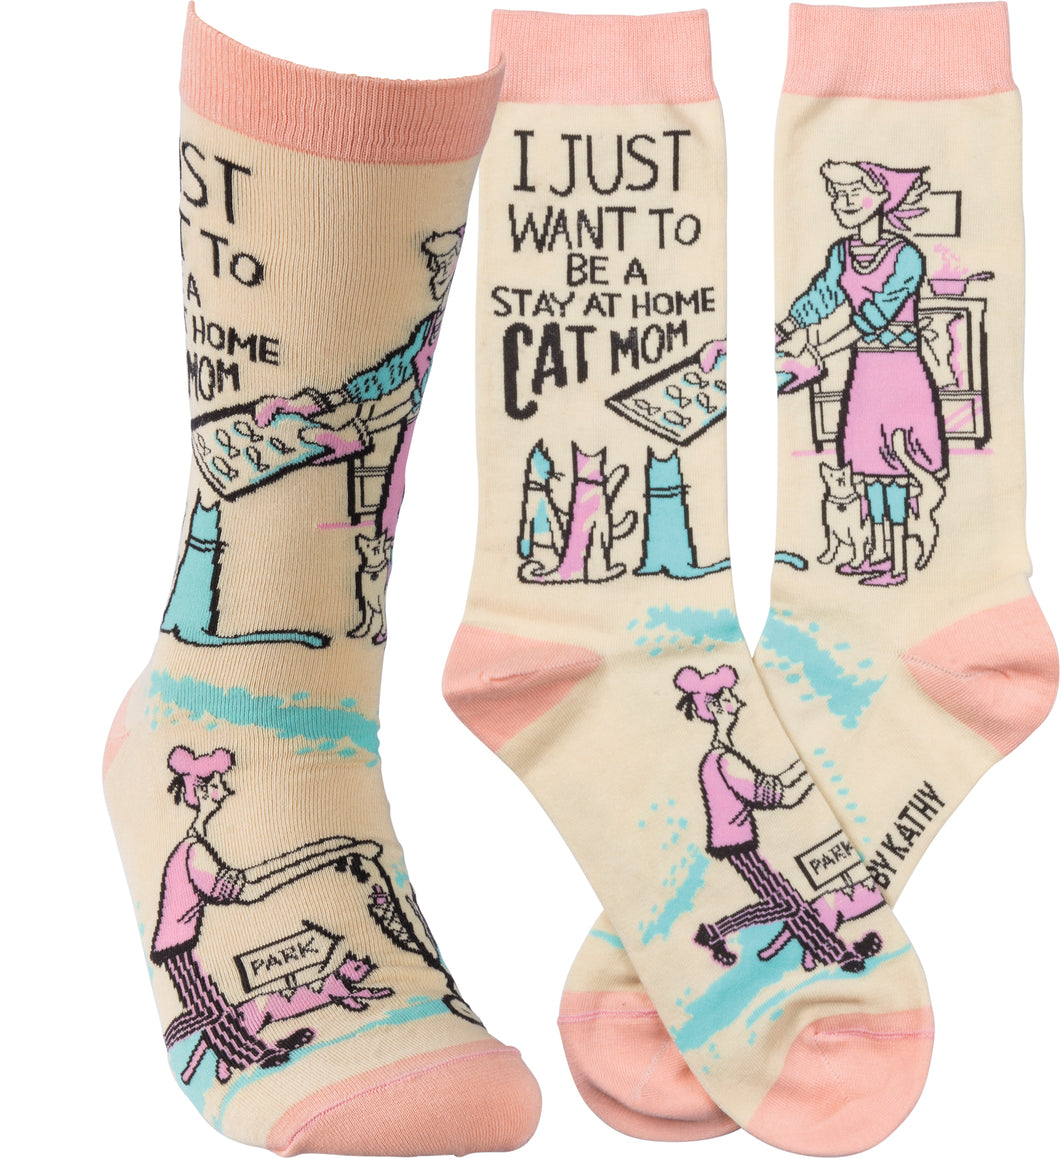 I Just Want To Be A Stay At Home Cat Mom Socks (Women’s)